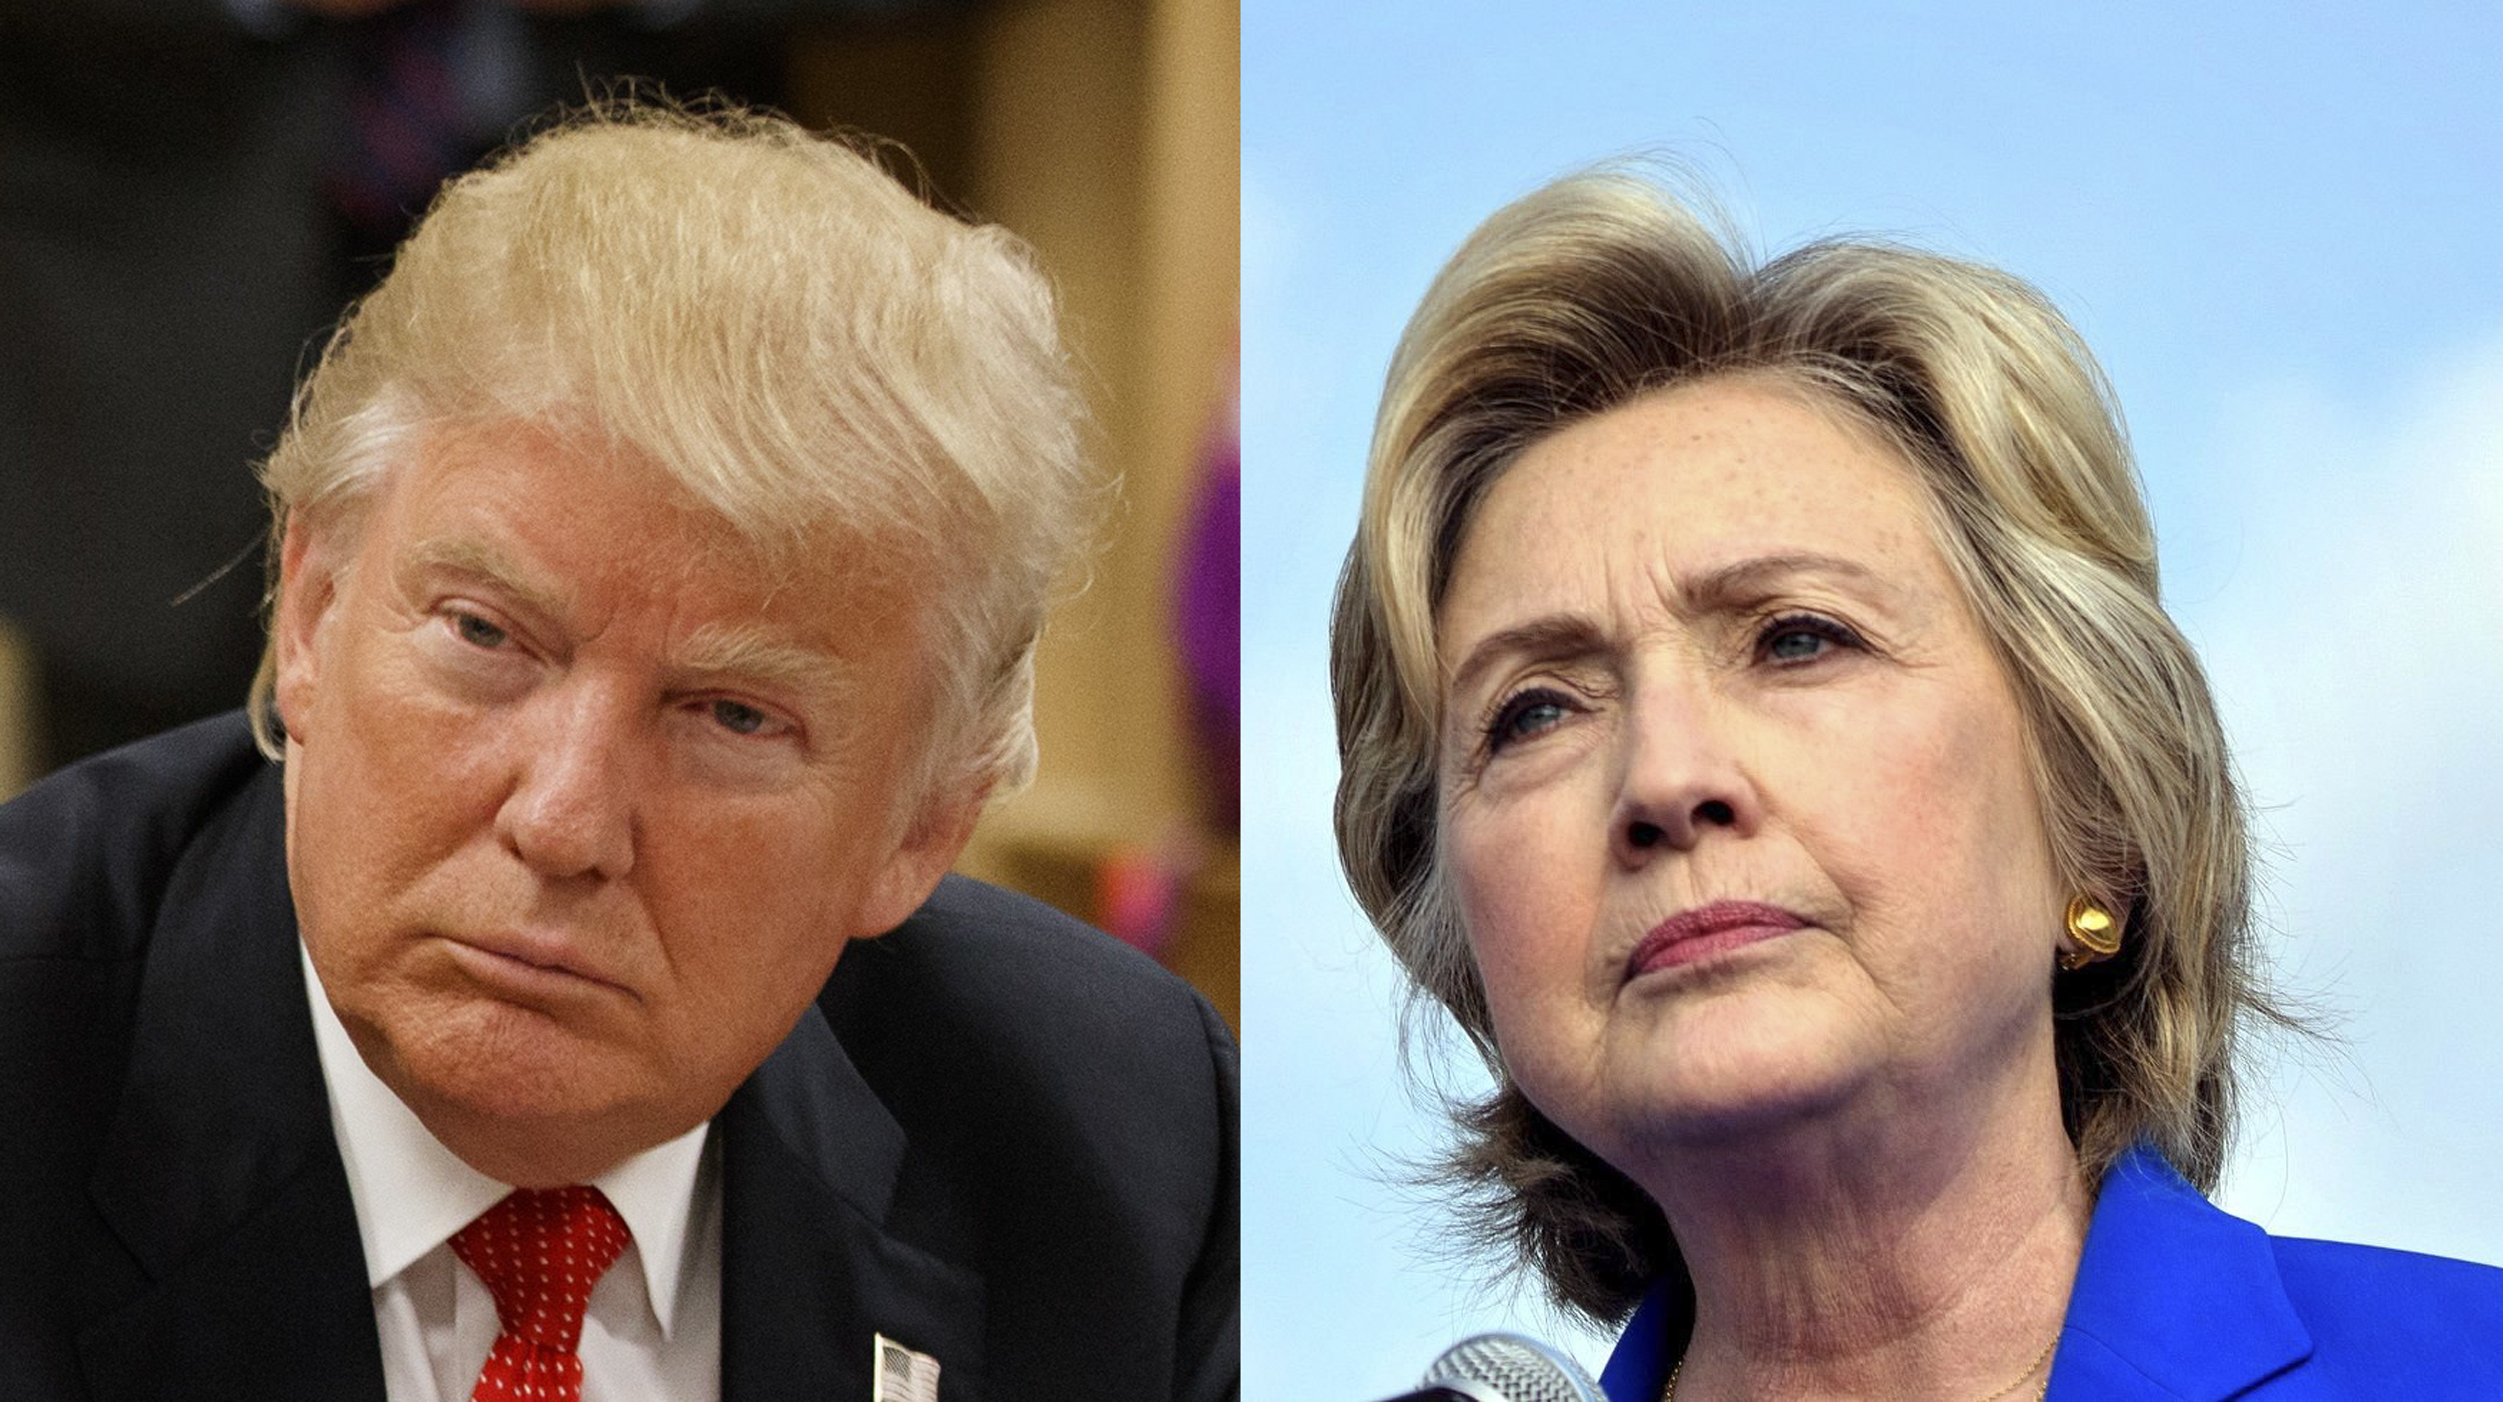 Presidential Nominees Donald Trump, left, and Hillary Clinton. (AP;Getty Images)